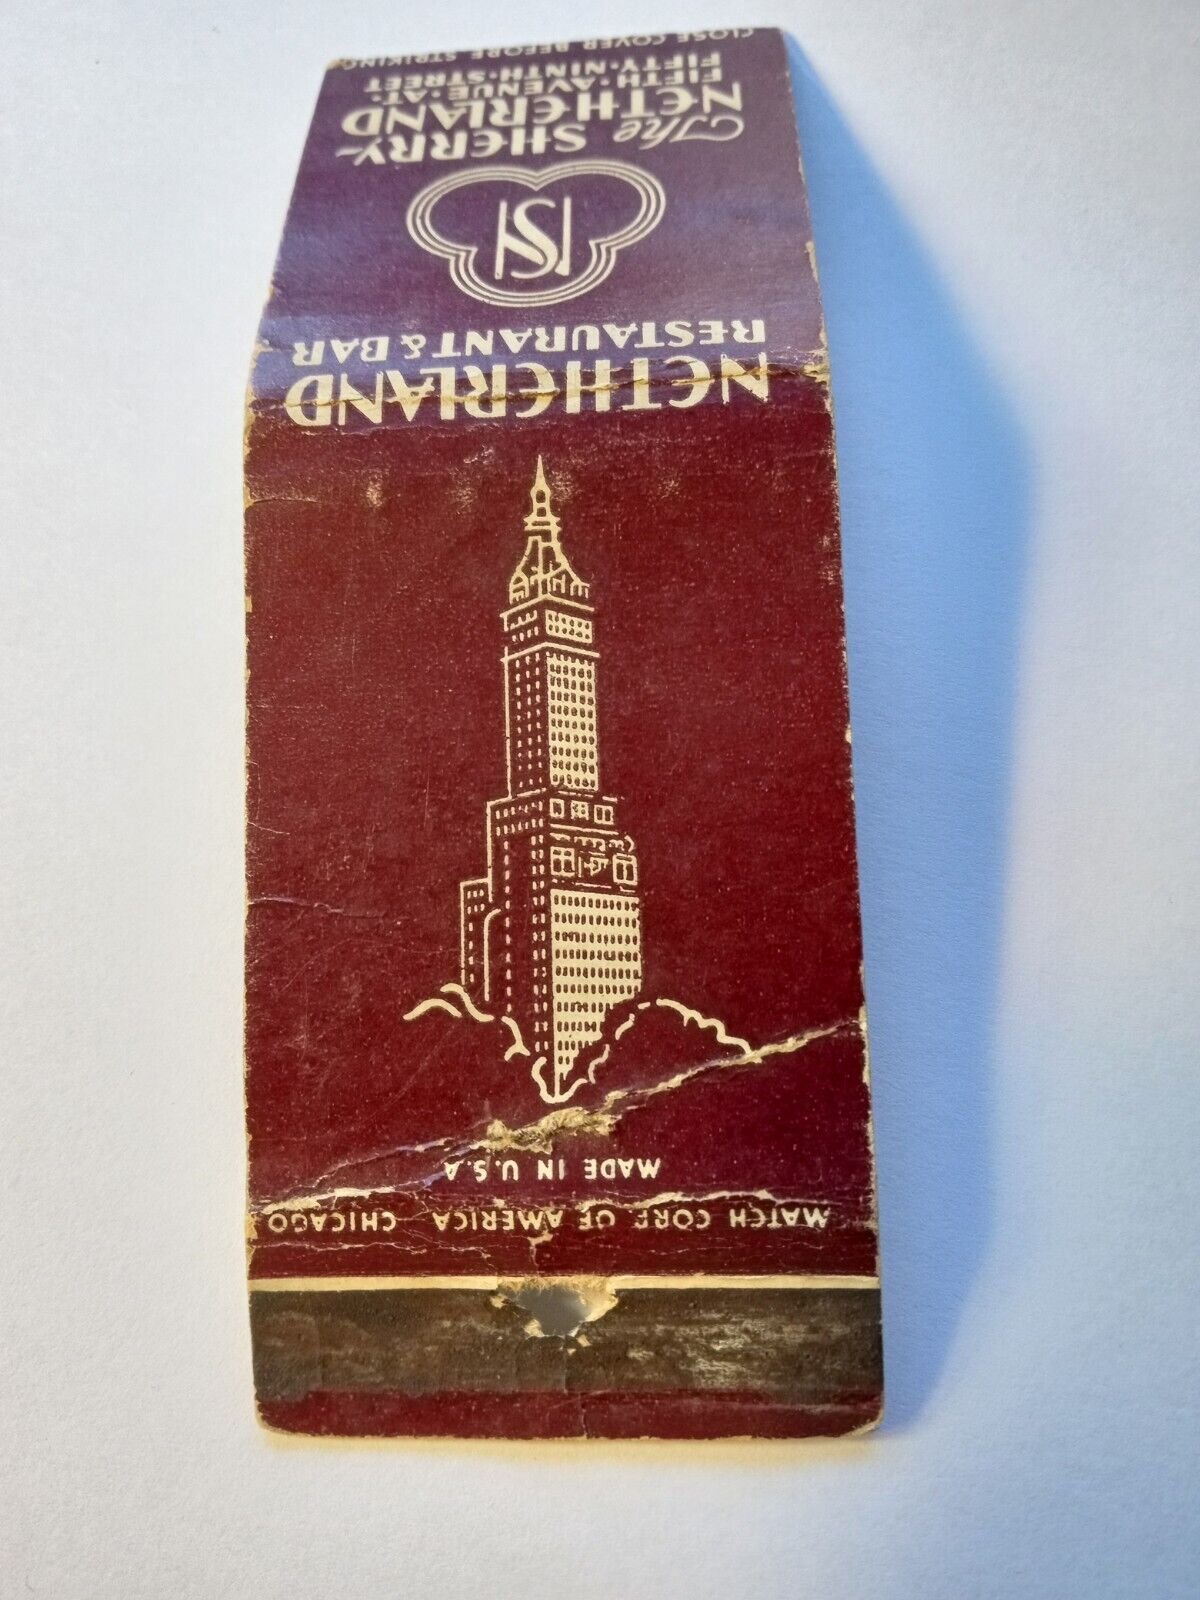 The Sherry Netherland Hotel Fifth Ave At 59th St  New York Matchbook